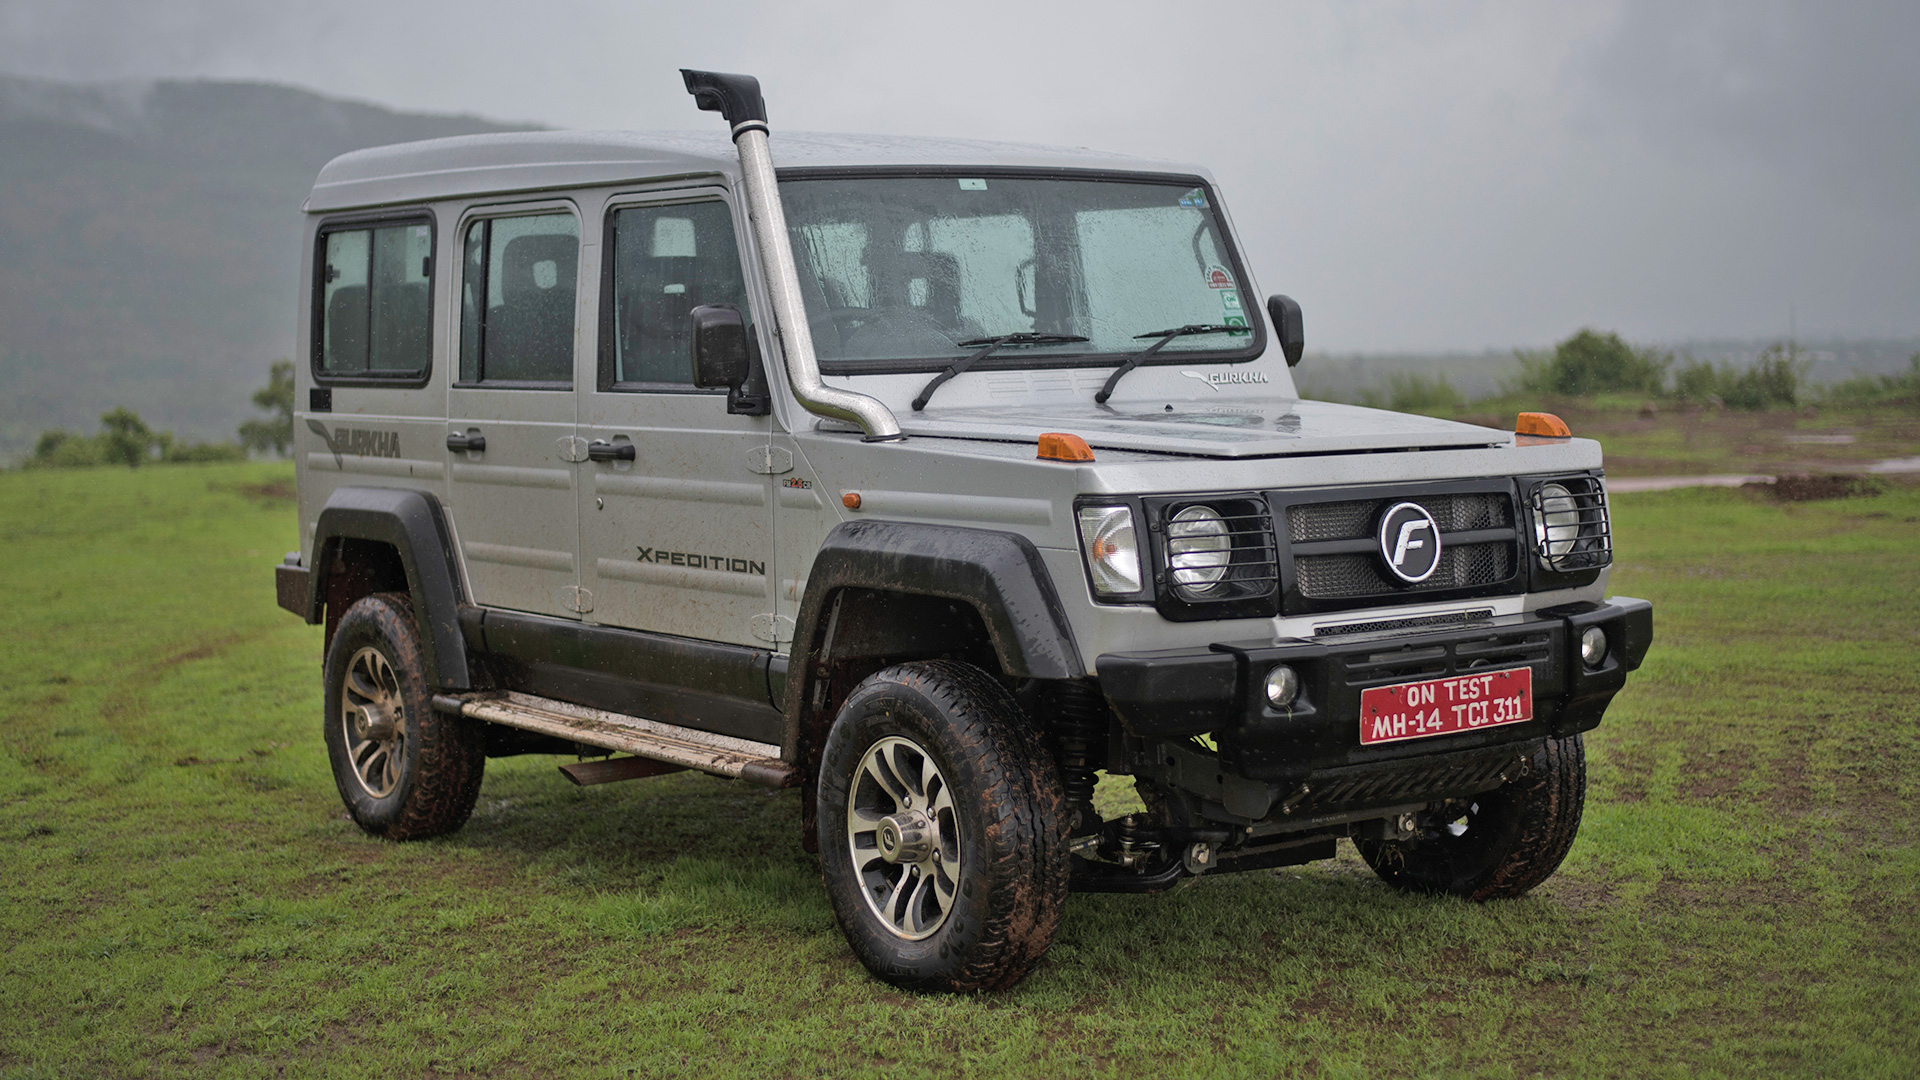 Force Gurkha Price in Nepal, BS6, Offroad, Specs, Mileage, Colors